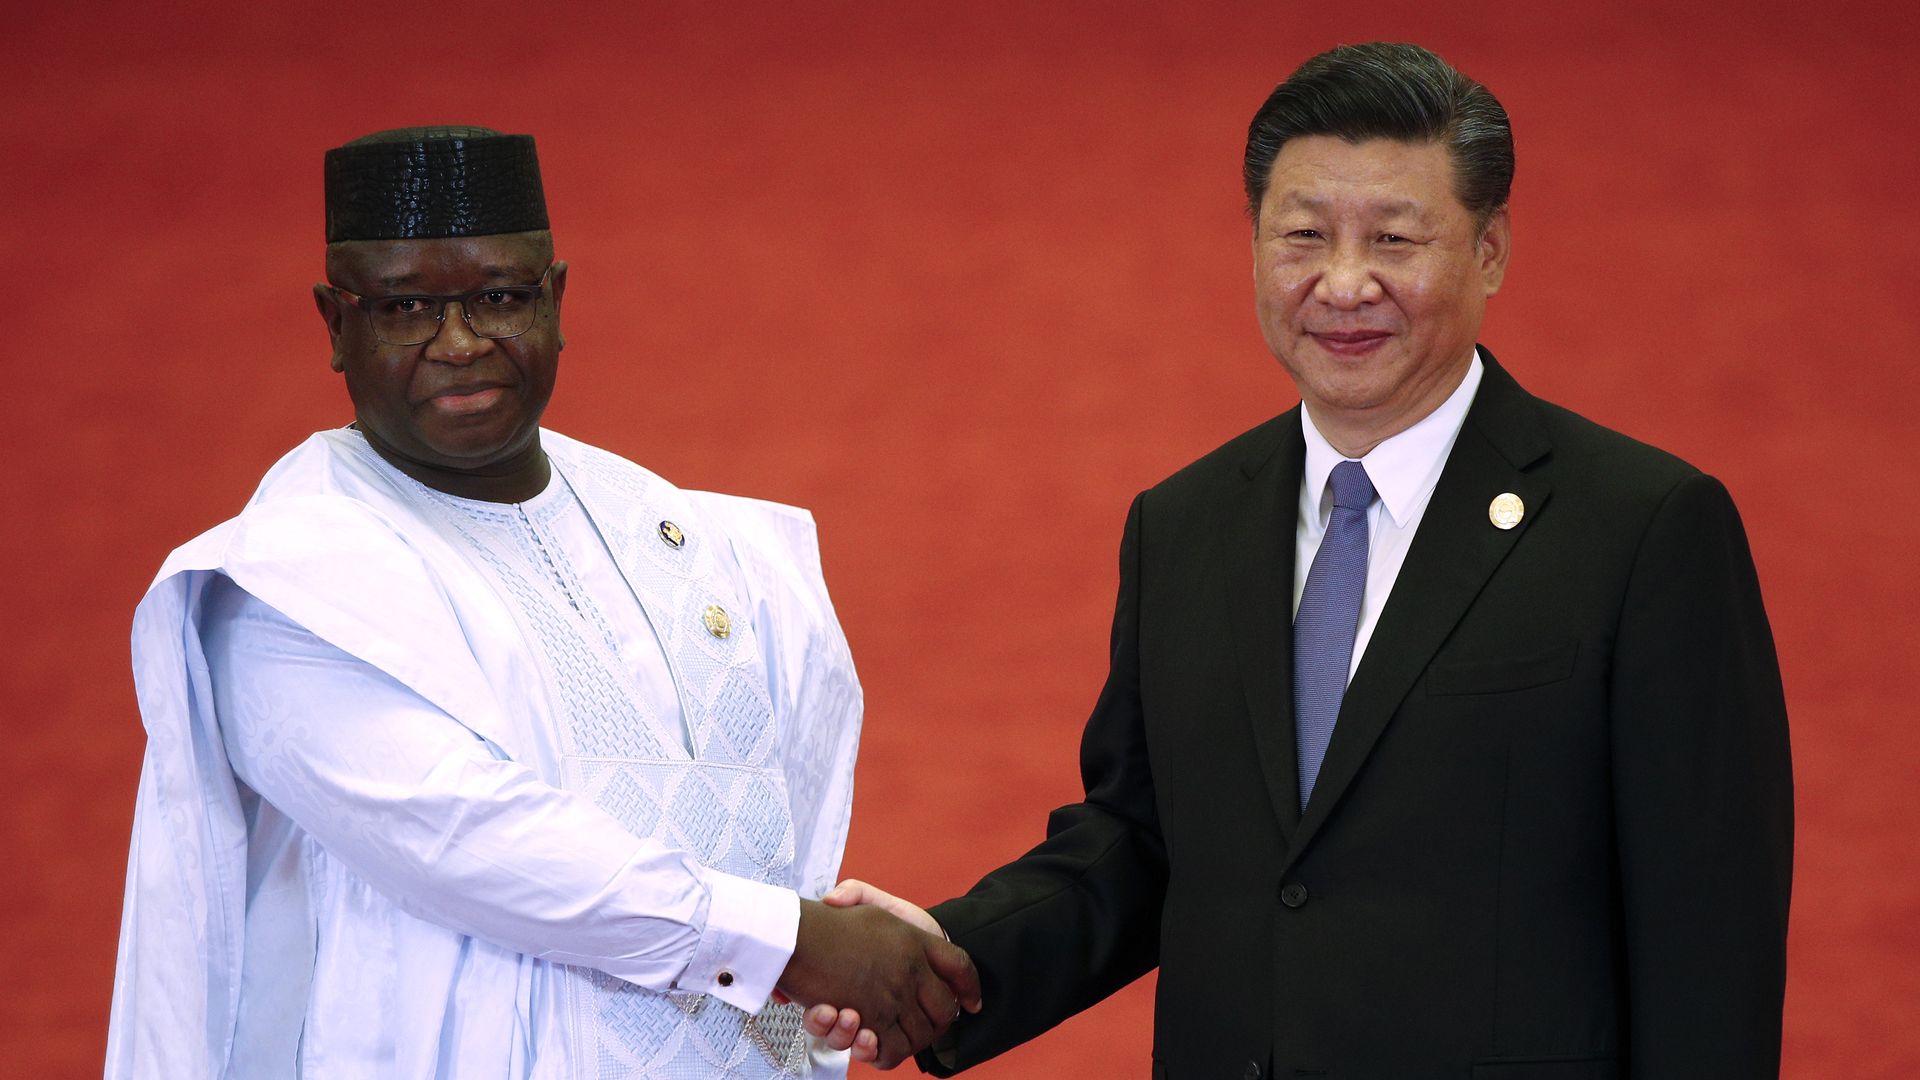 Sierra Leone President Julius Maada Bio shakes hands with Chinese President Xi Jinping during the Forum on China-Africa Cooperation on September 3, 2018 in Beijing, China.